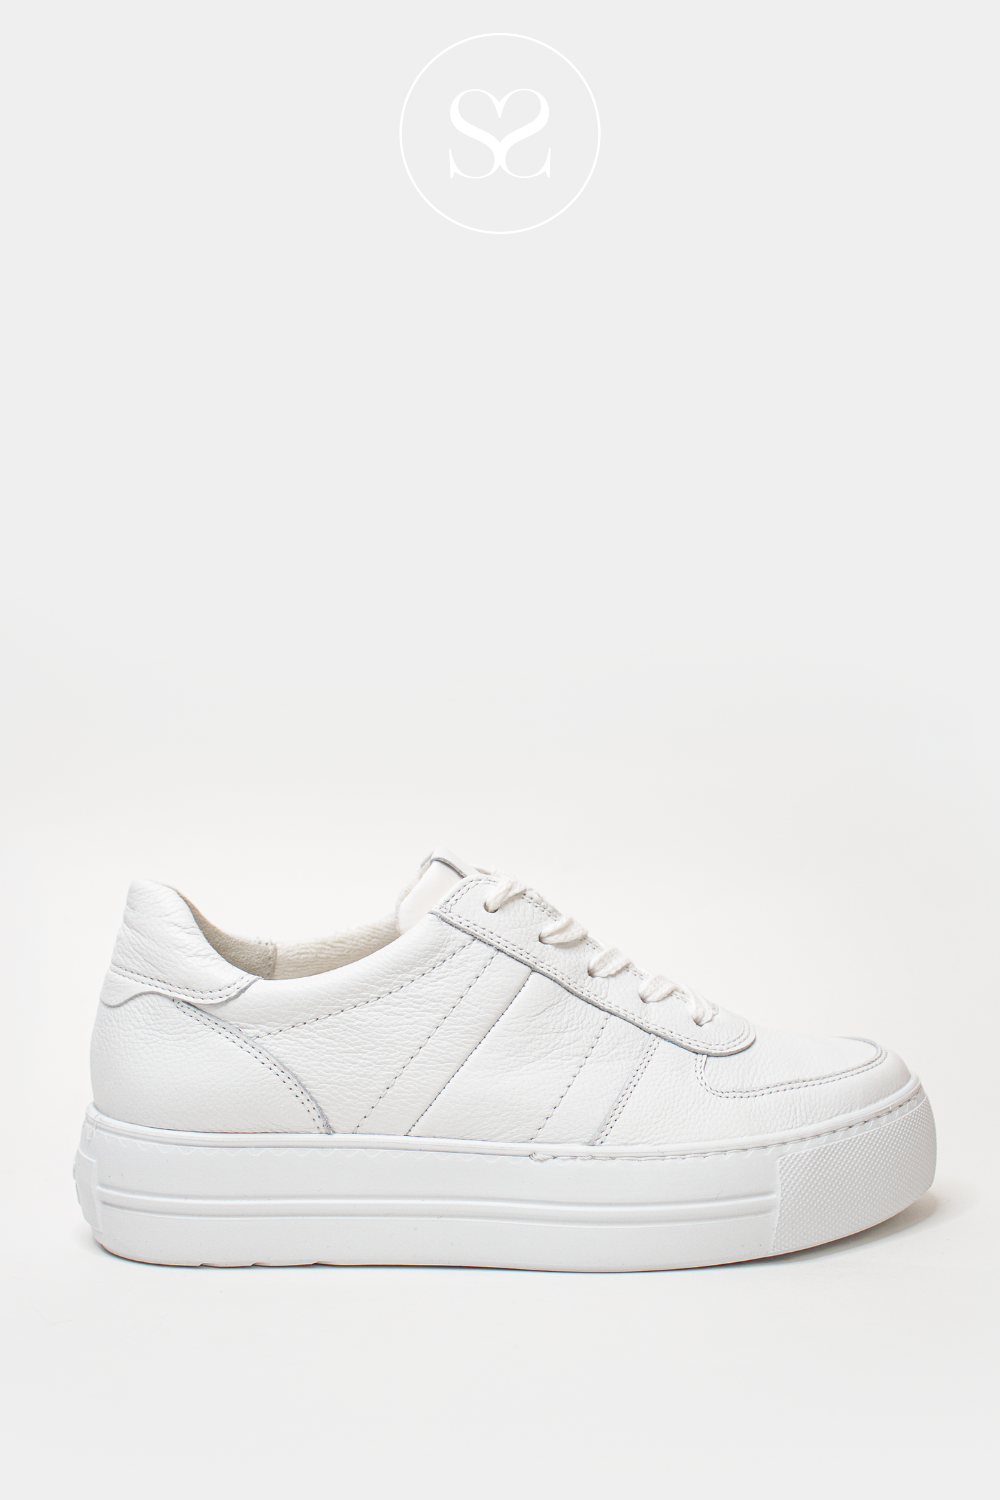 PAUL GREEN 5230 WHITE LACED FLATFORM RETRO TRAINERS